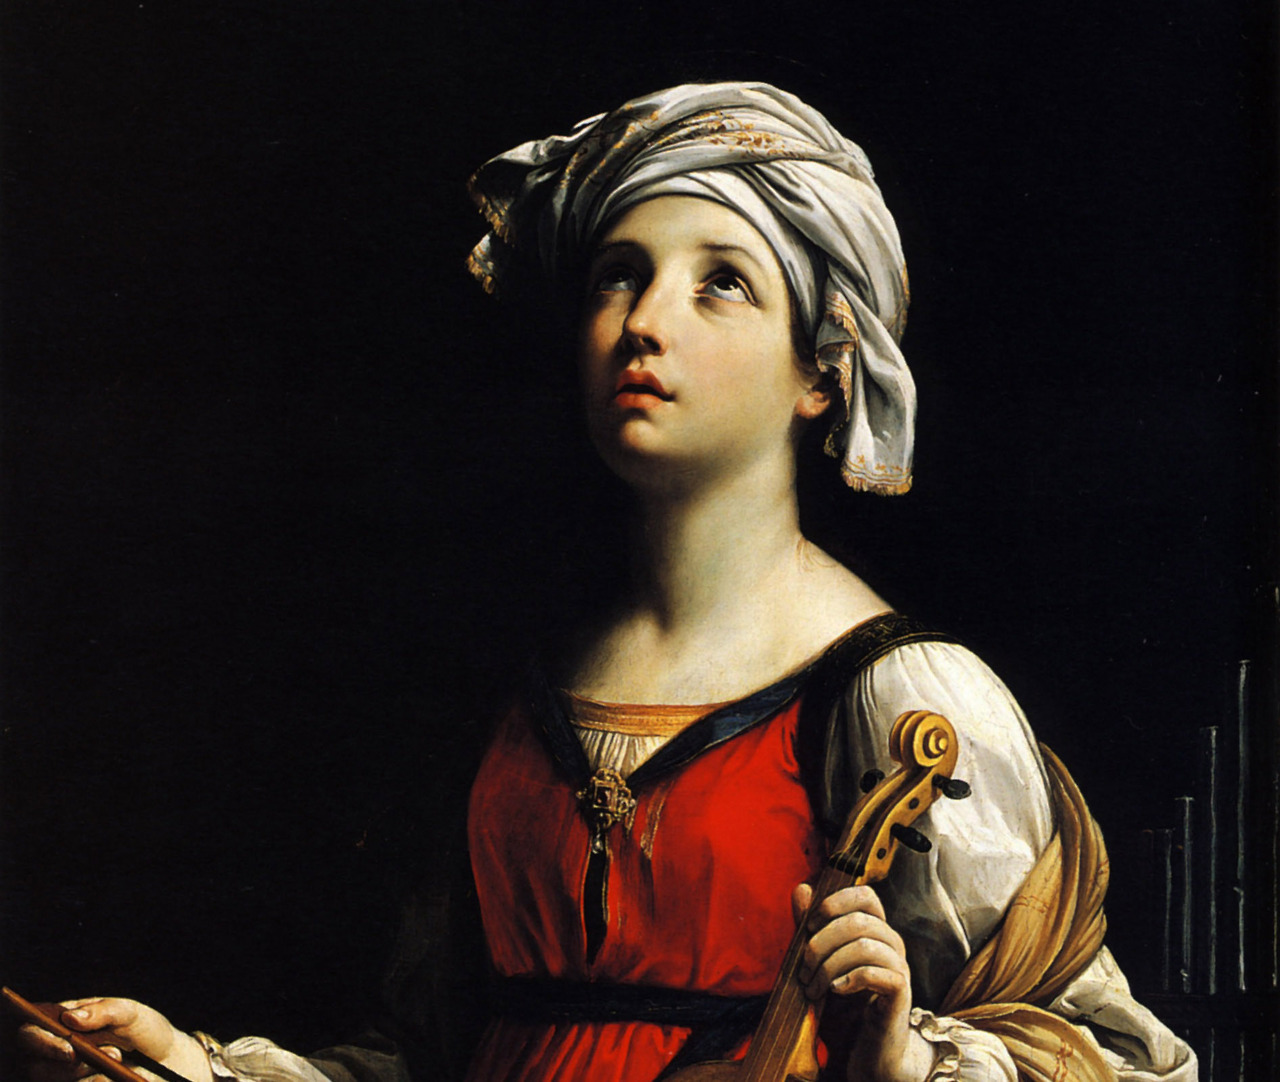 therepublicofletters: Details of Saint Mary Magadalene (1635) and Saint Cecilia (1606)